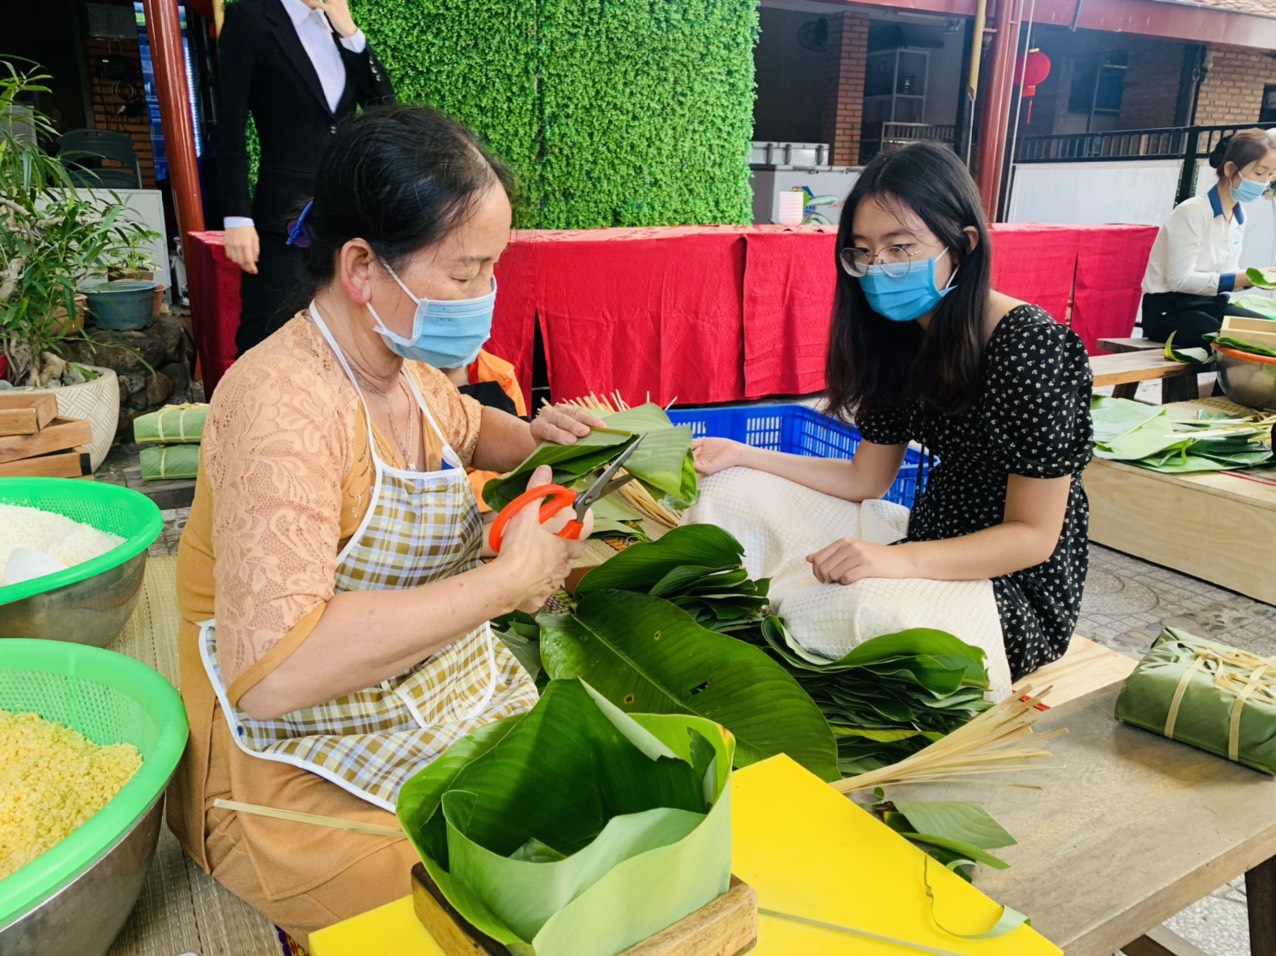 The hotel prepares ingredients to make Banh Chung including glutinous rice, mung beans, pork, and dong leaves